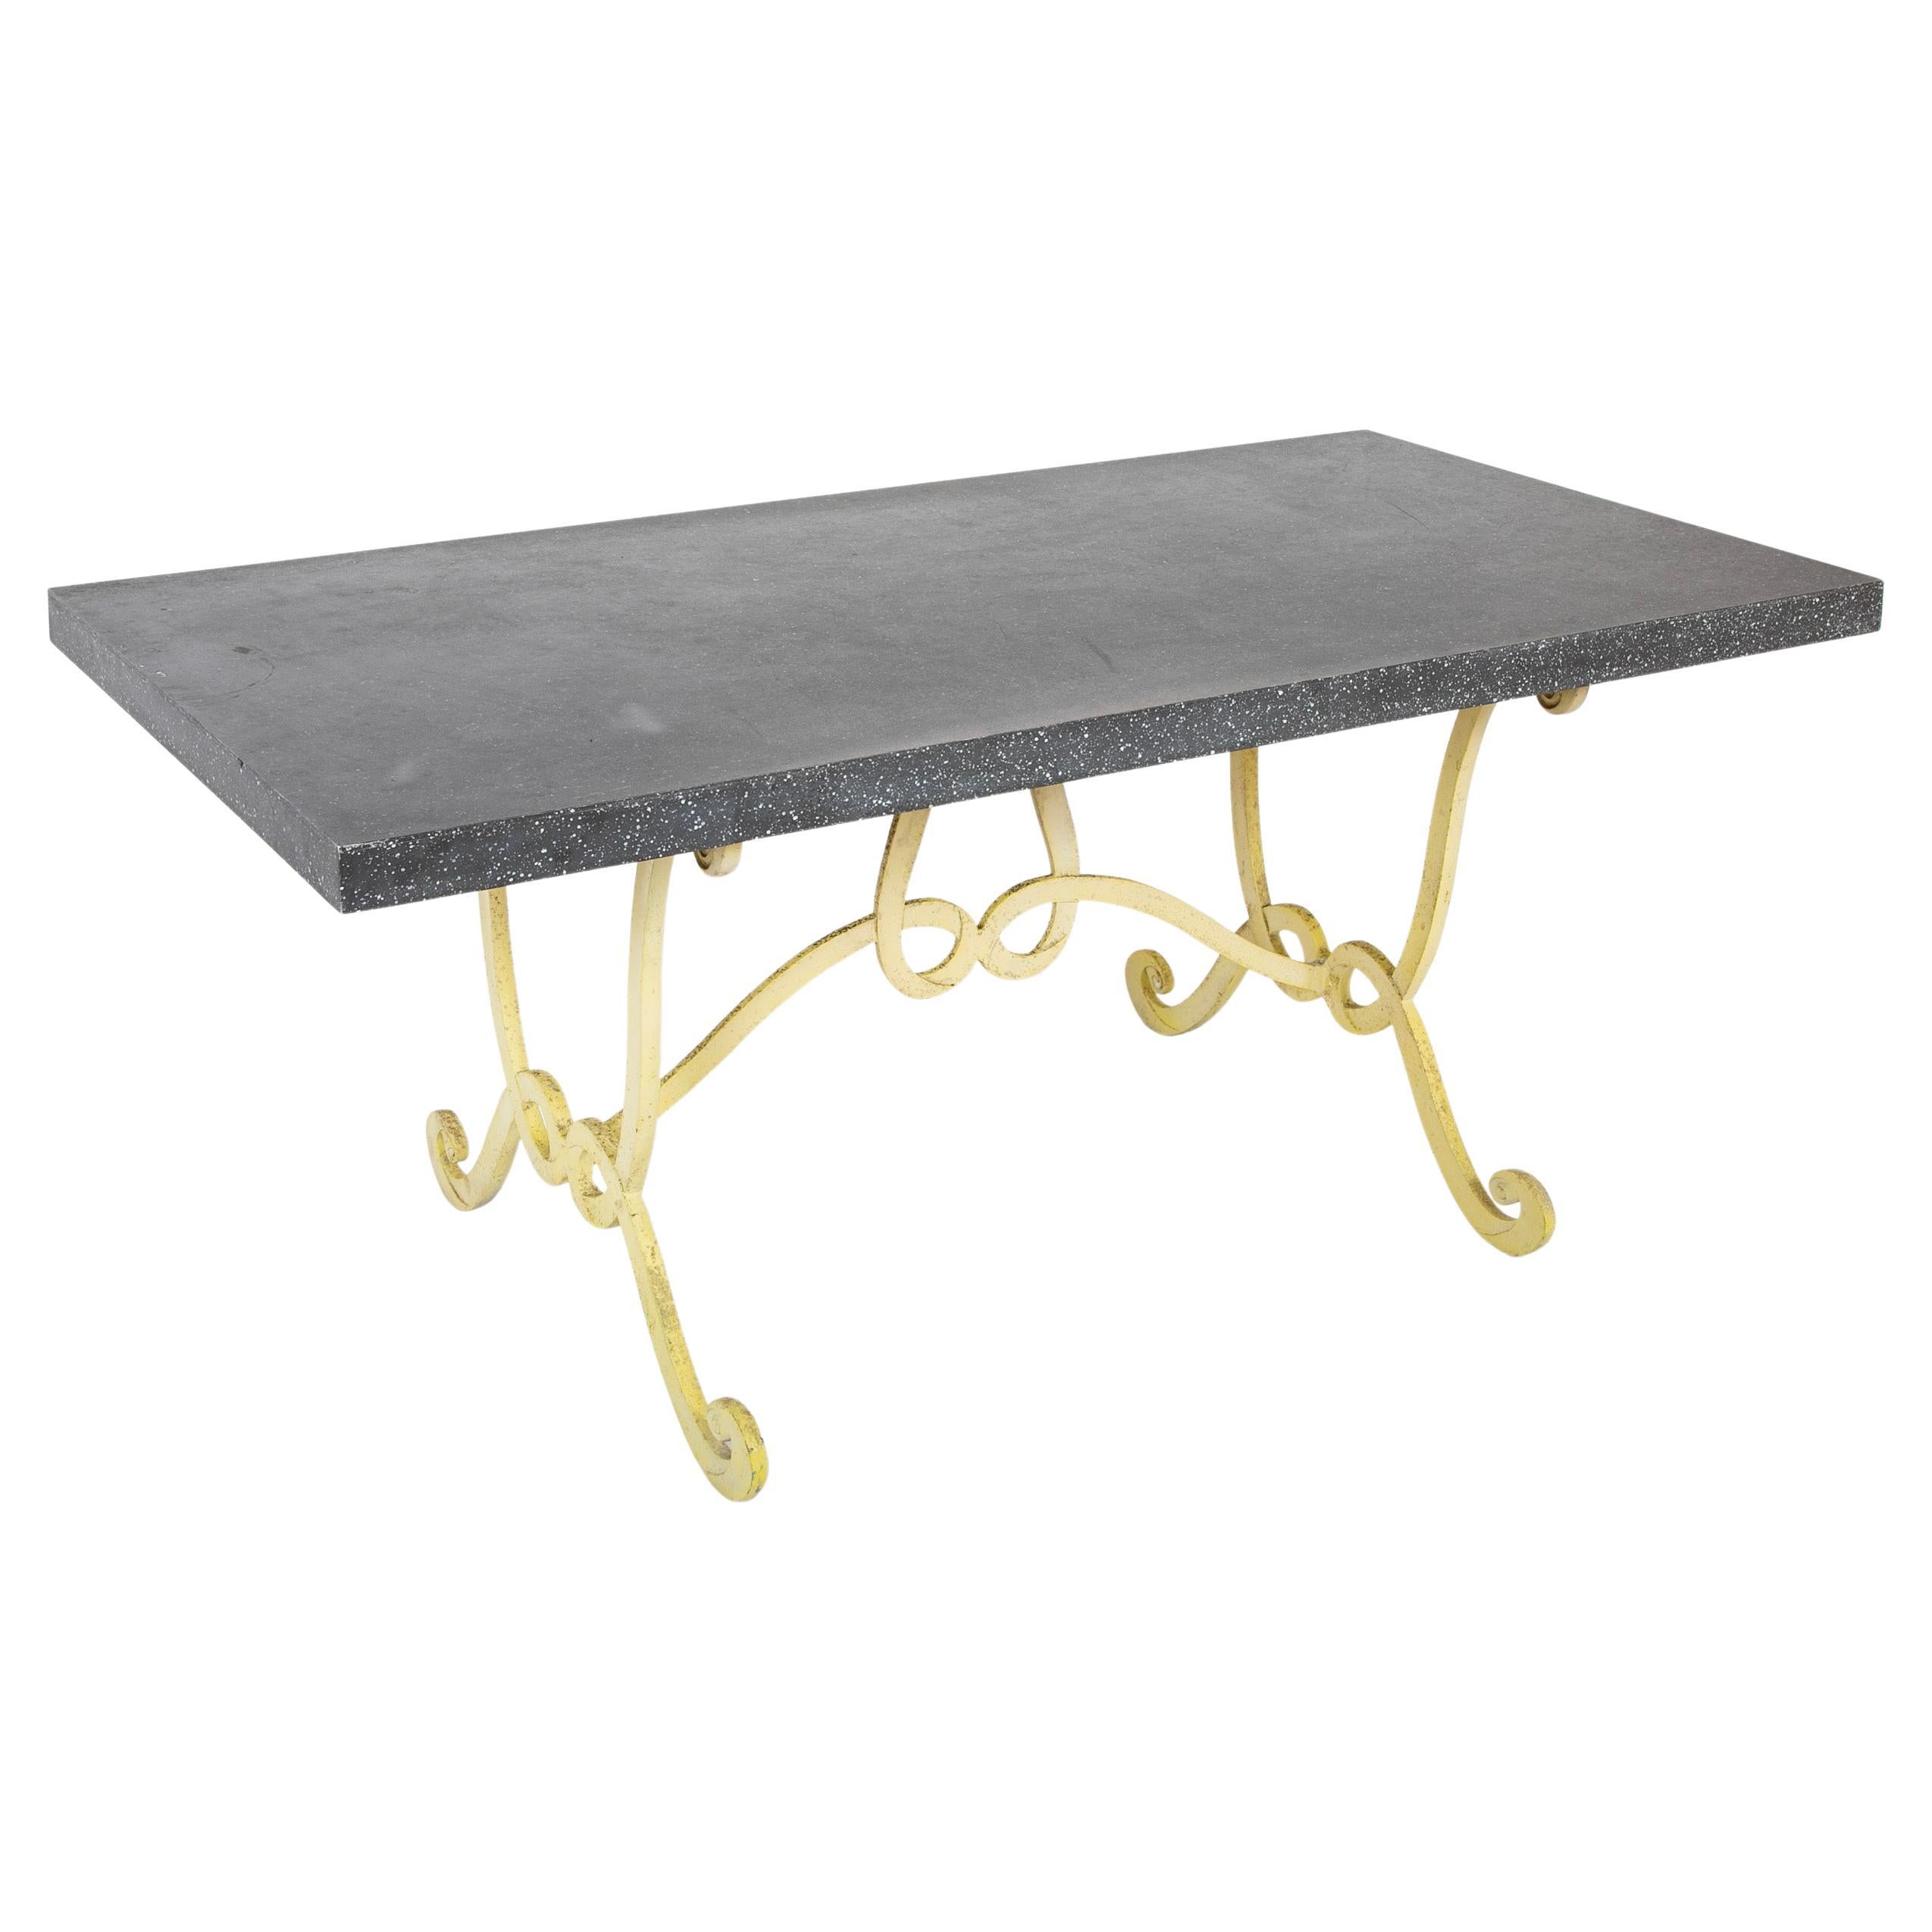 Dorothy Draper Table With Faux Porphyry Steel Top And Yellow Wrought Iron Base For Sale